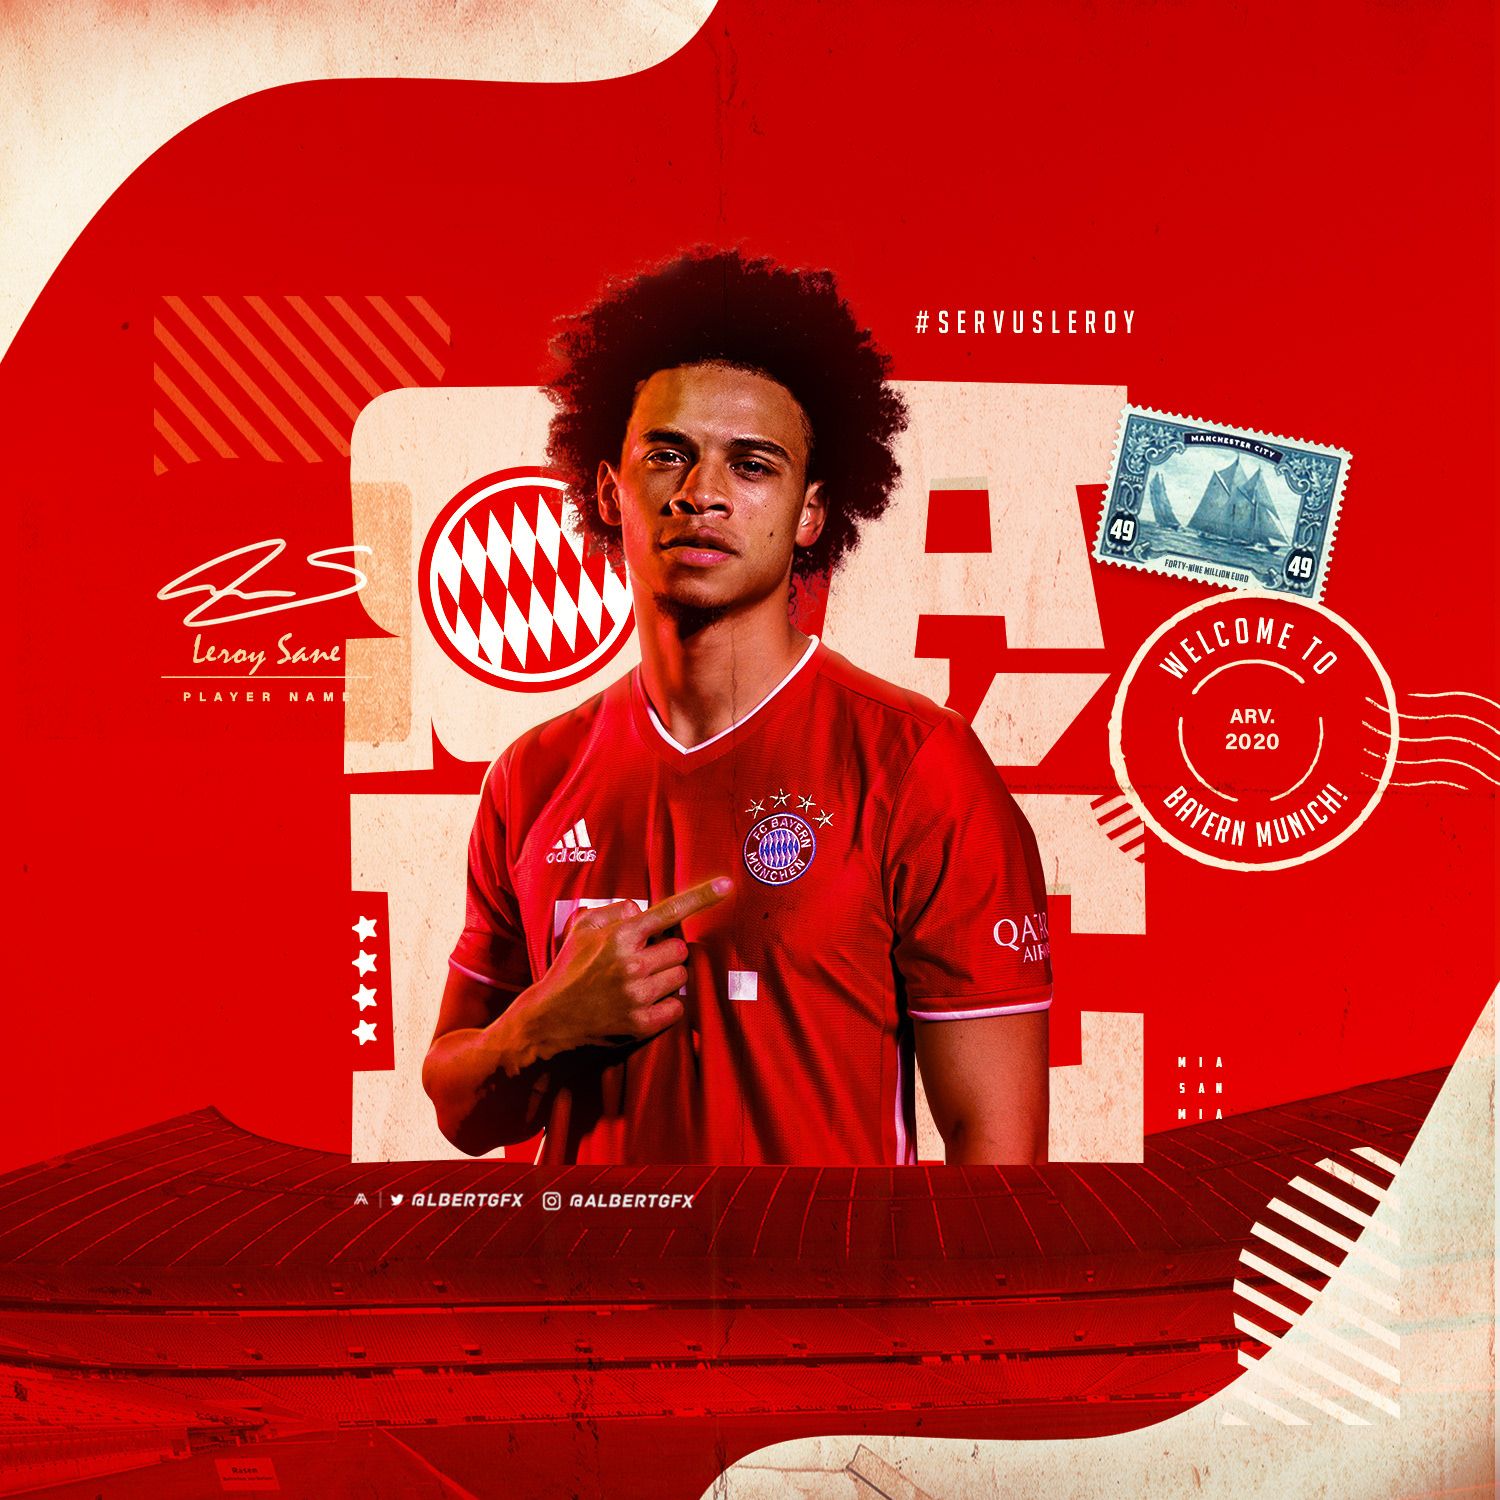 Leroy Sane projects. Photo, videos, logos, illustrations and branding